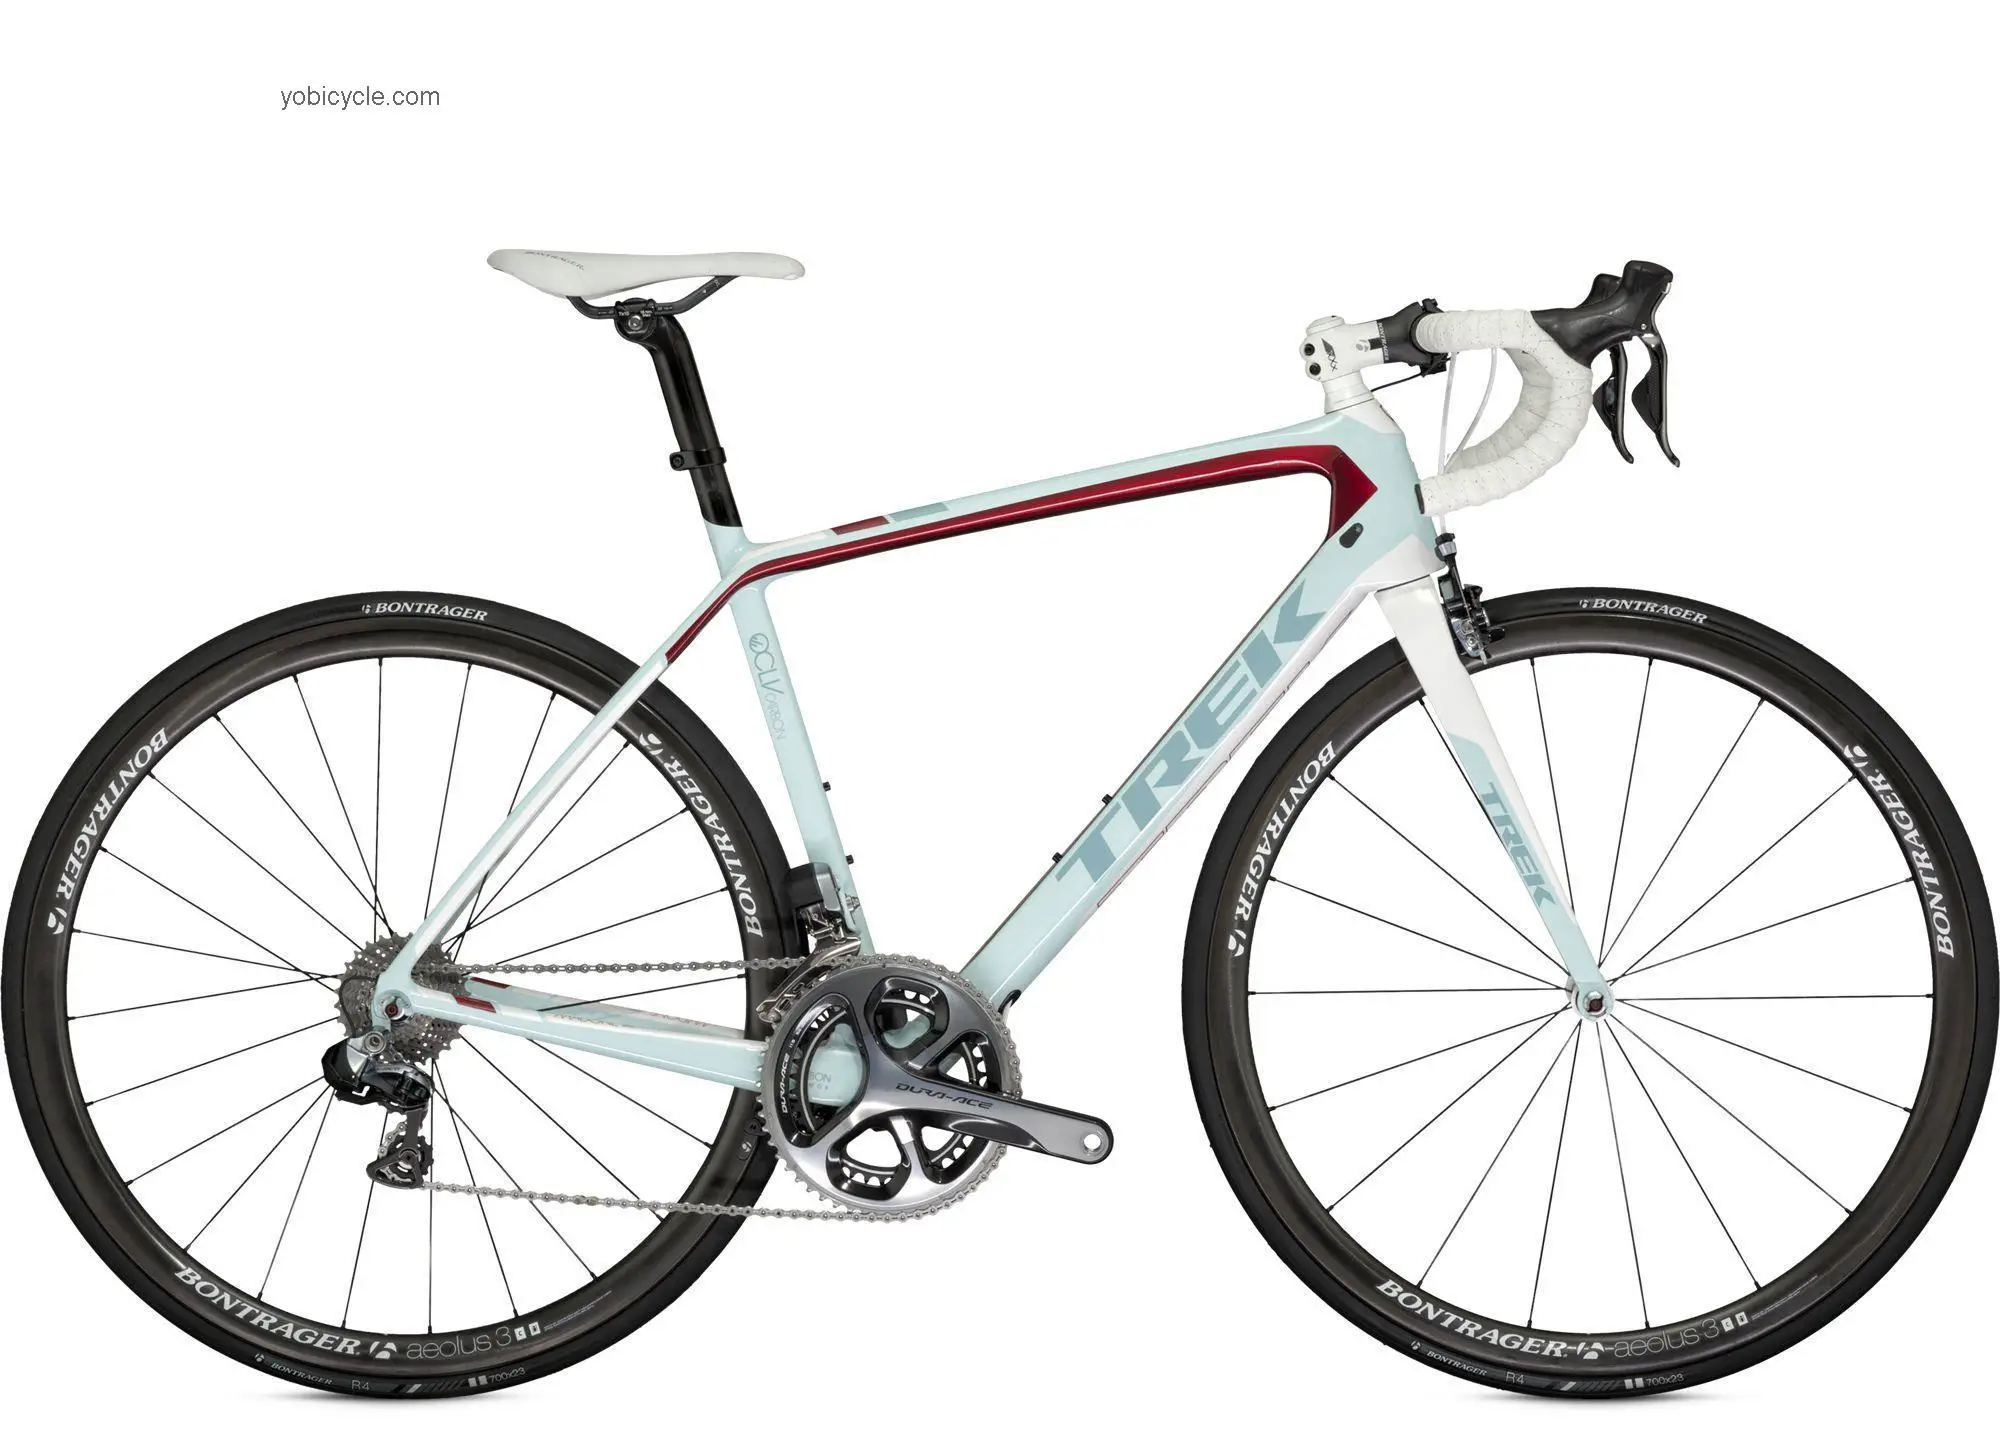 Trek Madone 7.9 WSD 2013 comparison online with competitors